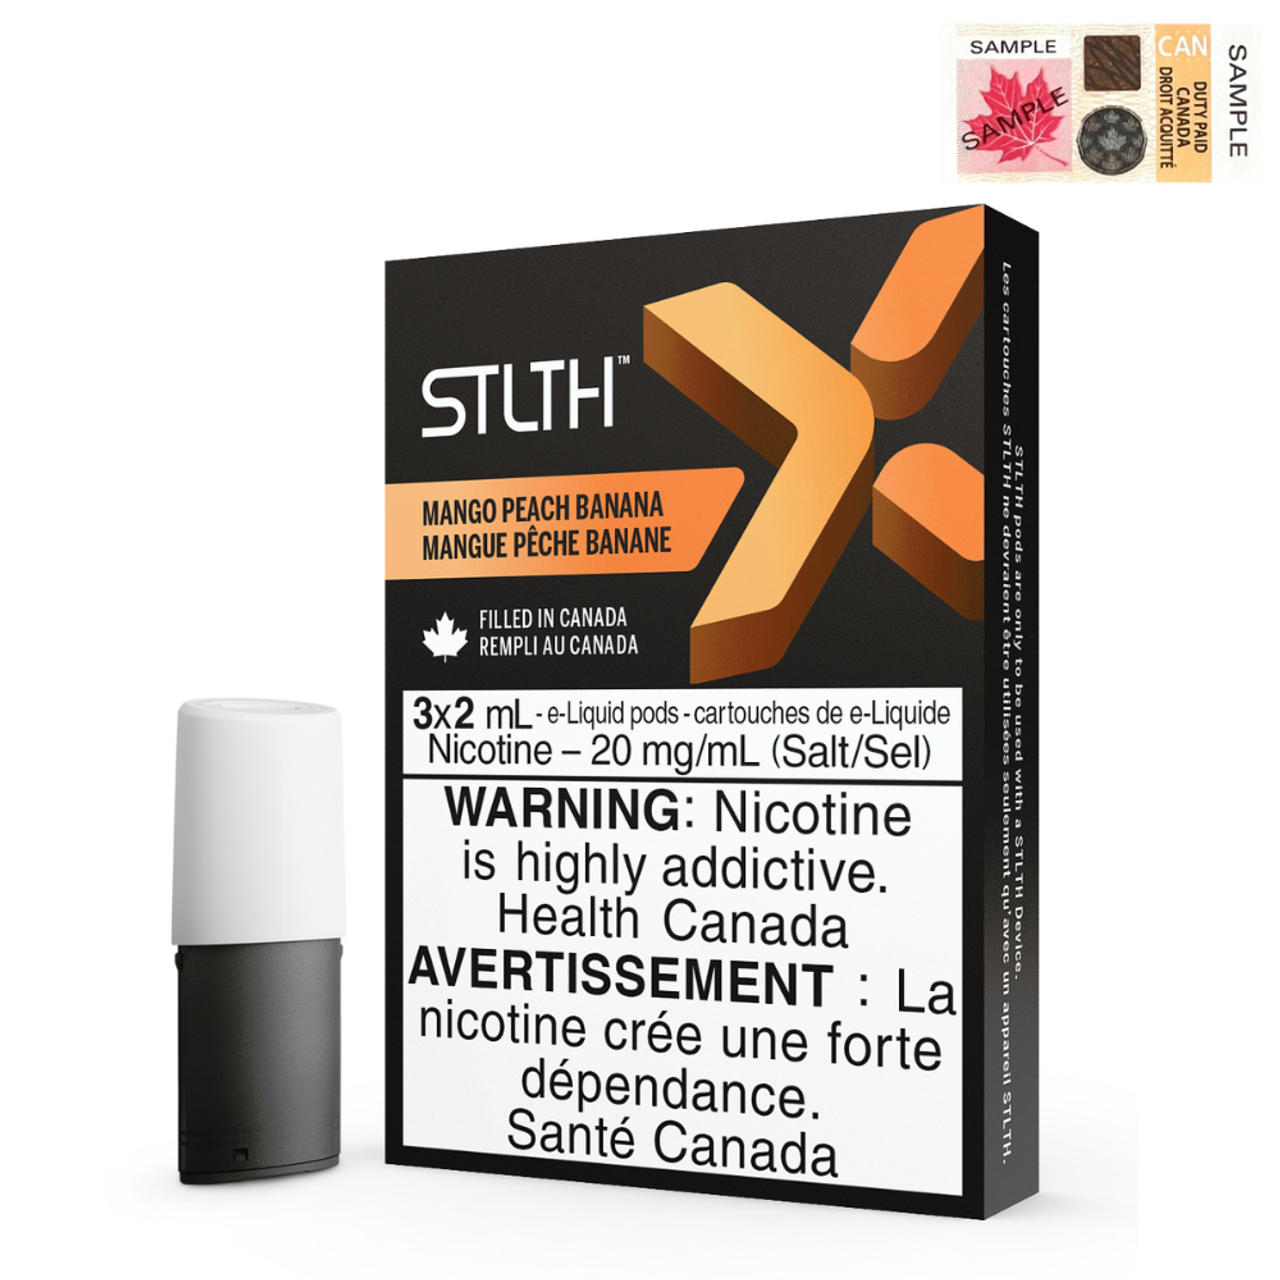 Mango Peach Banana (Stamped) STLTH X Pods Pack of 3 - B.C. Compliance